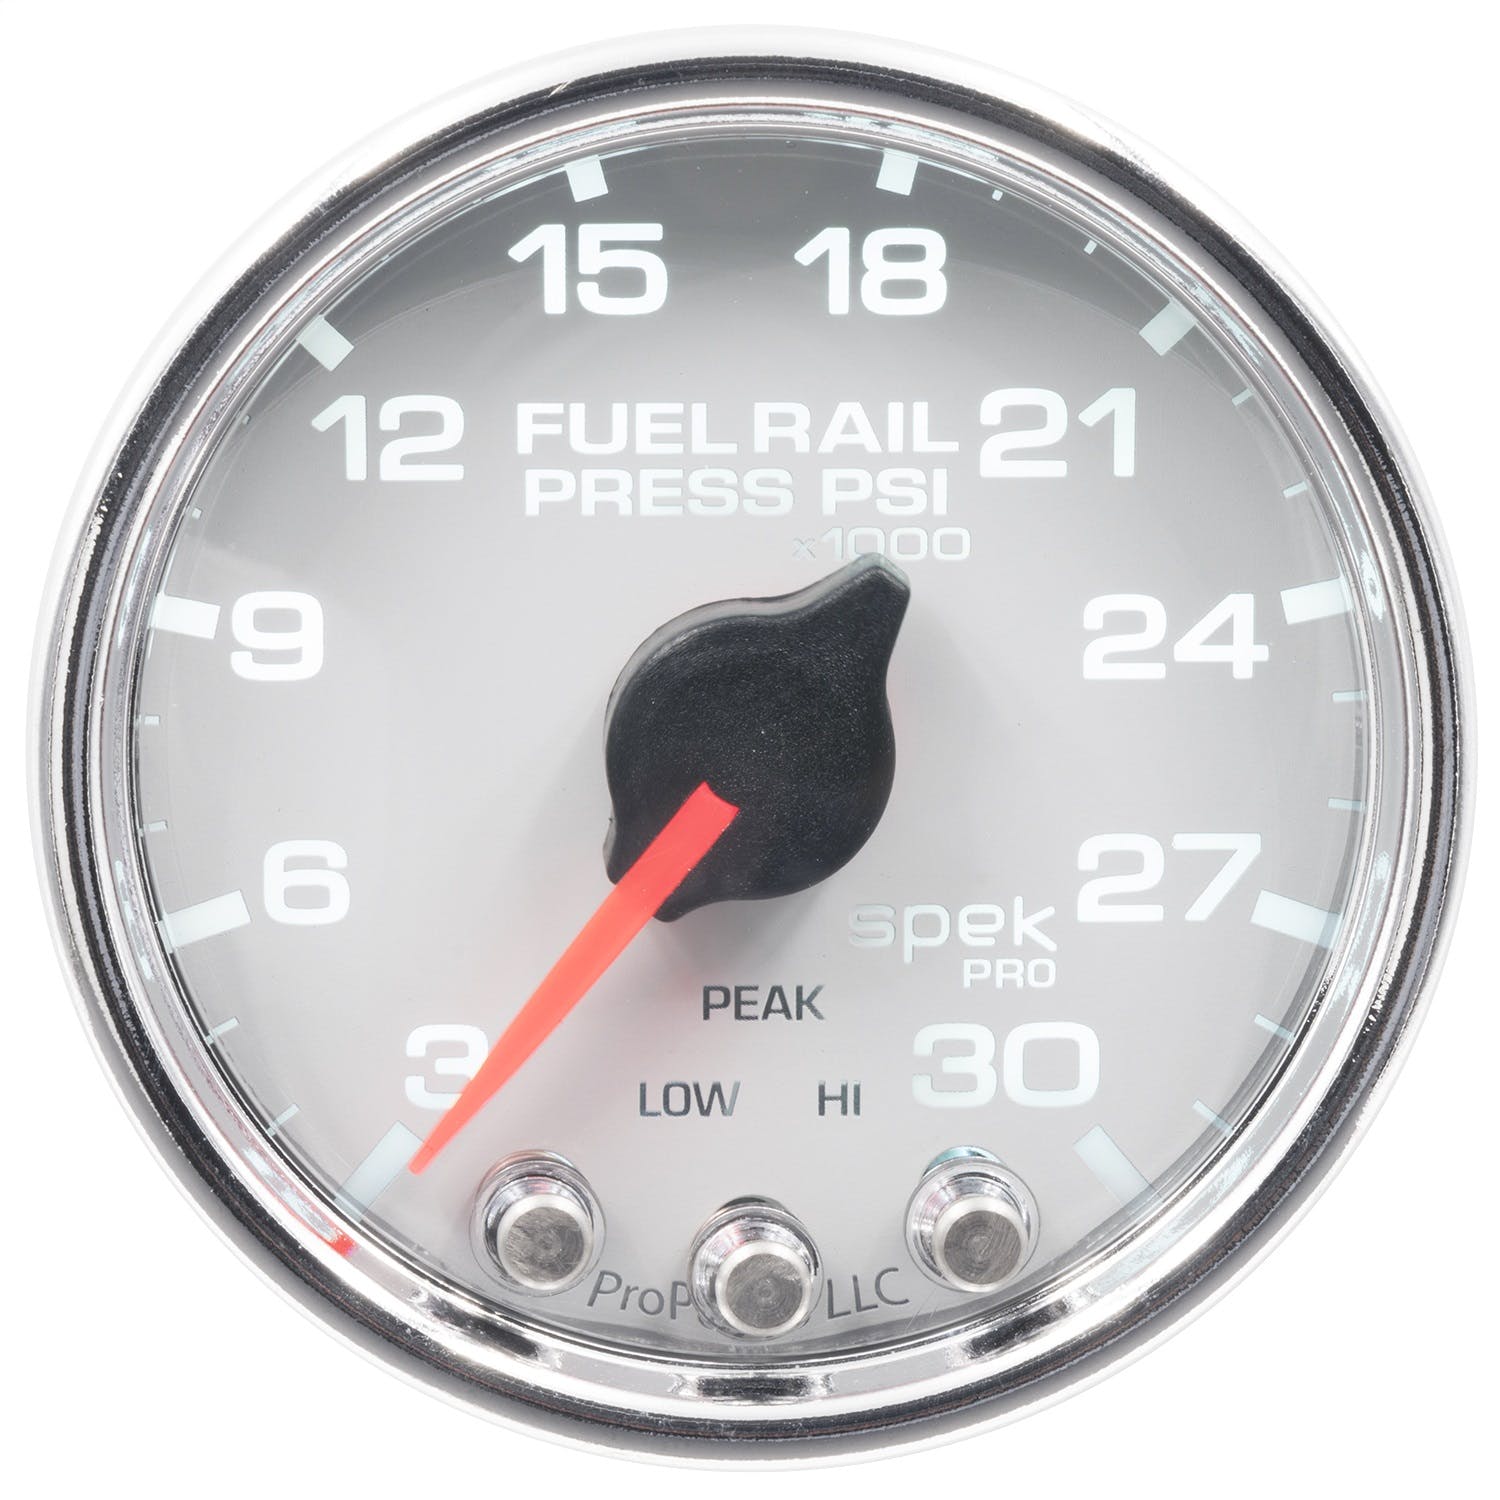 AutoMeter Products P32111 Rail Gauge, 2 1/16, 30KPSI, Stepper Motor w/Peak and Warning, White/Chrome